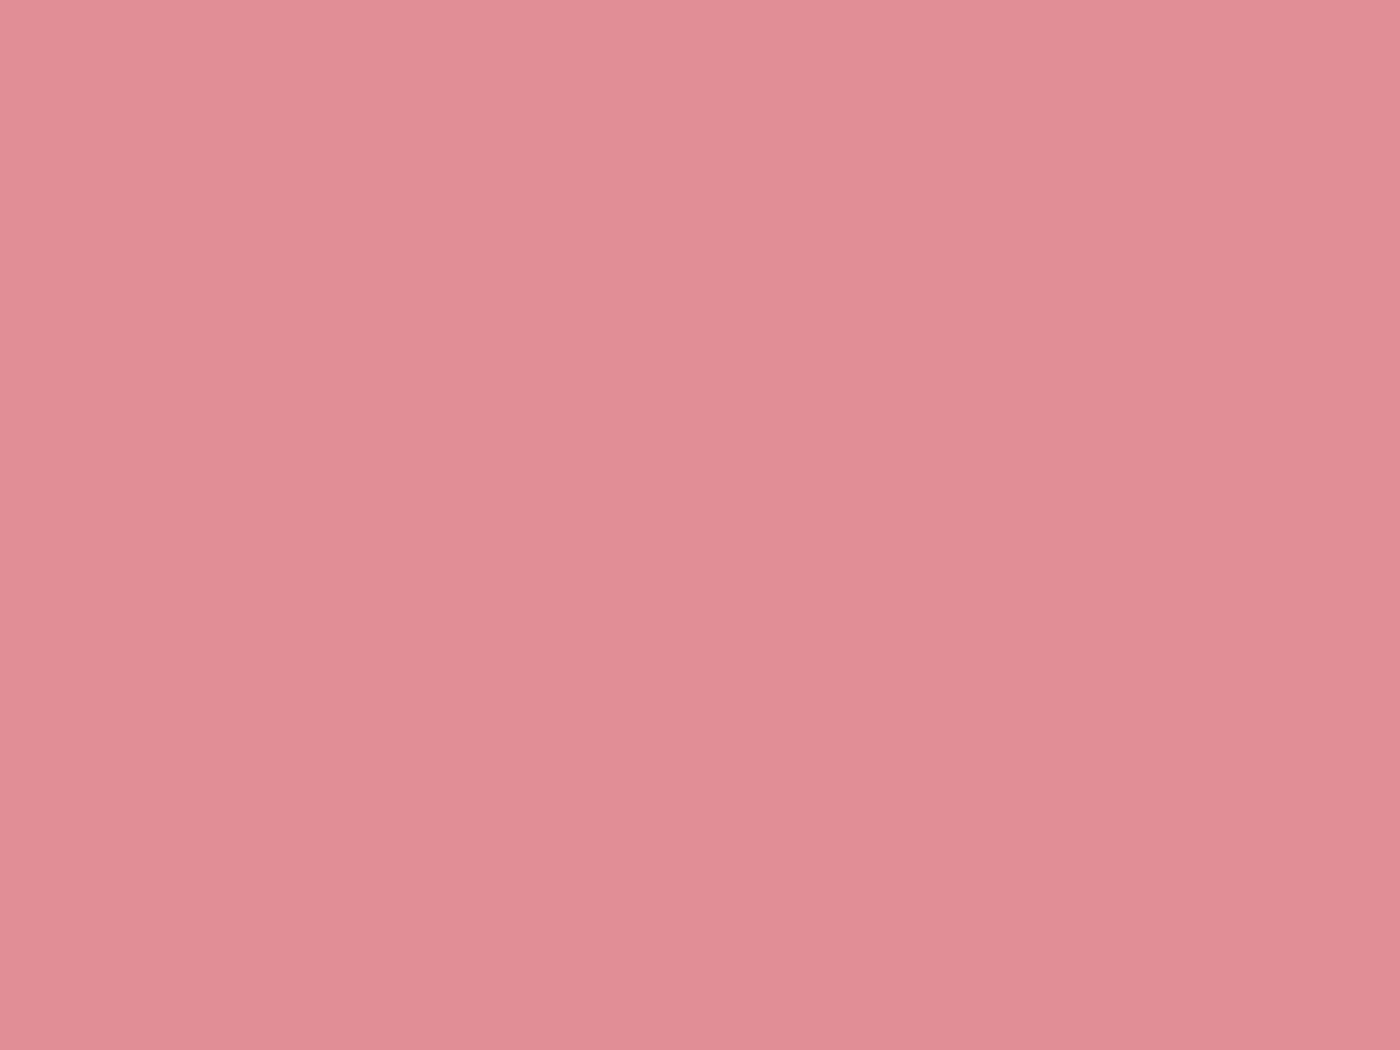 1400x1050 Ruddy Pink Solid Color Background